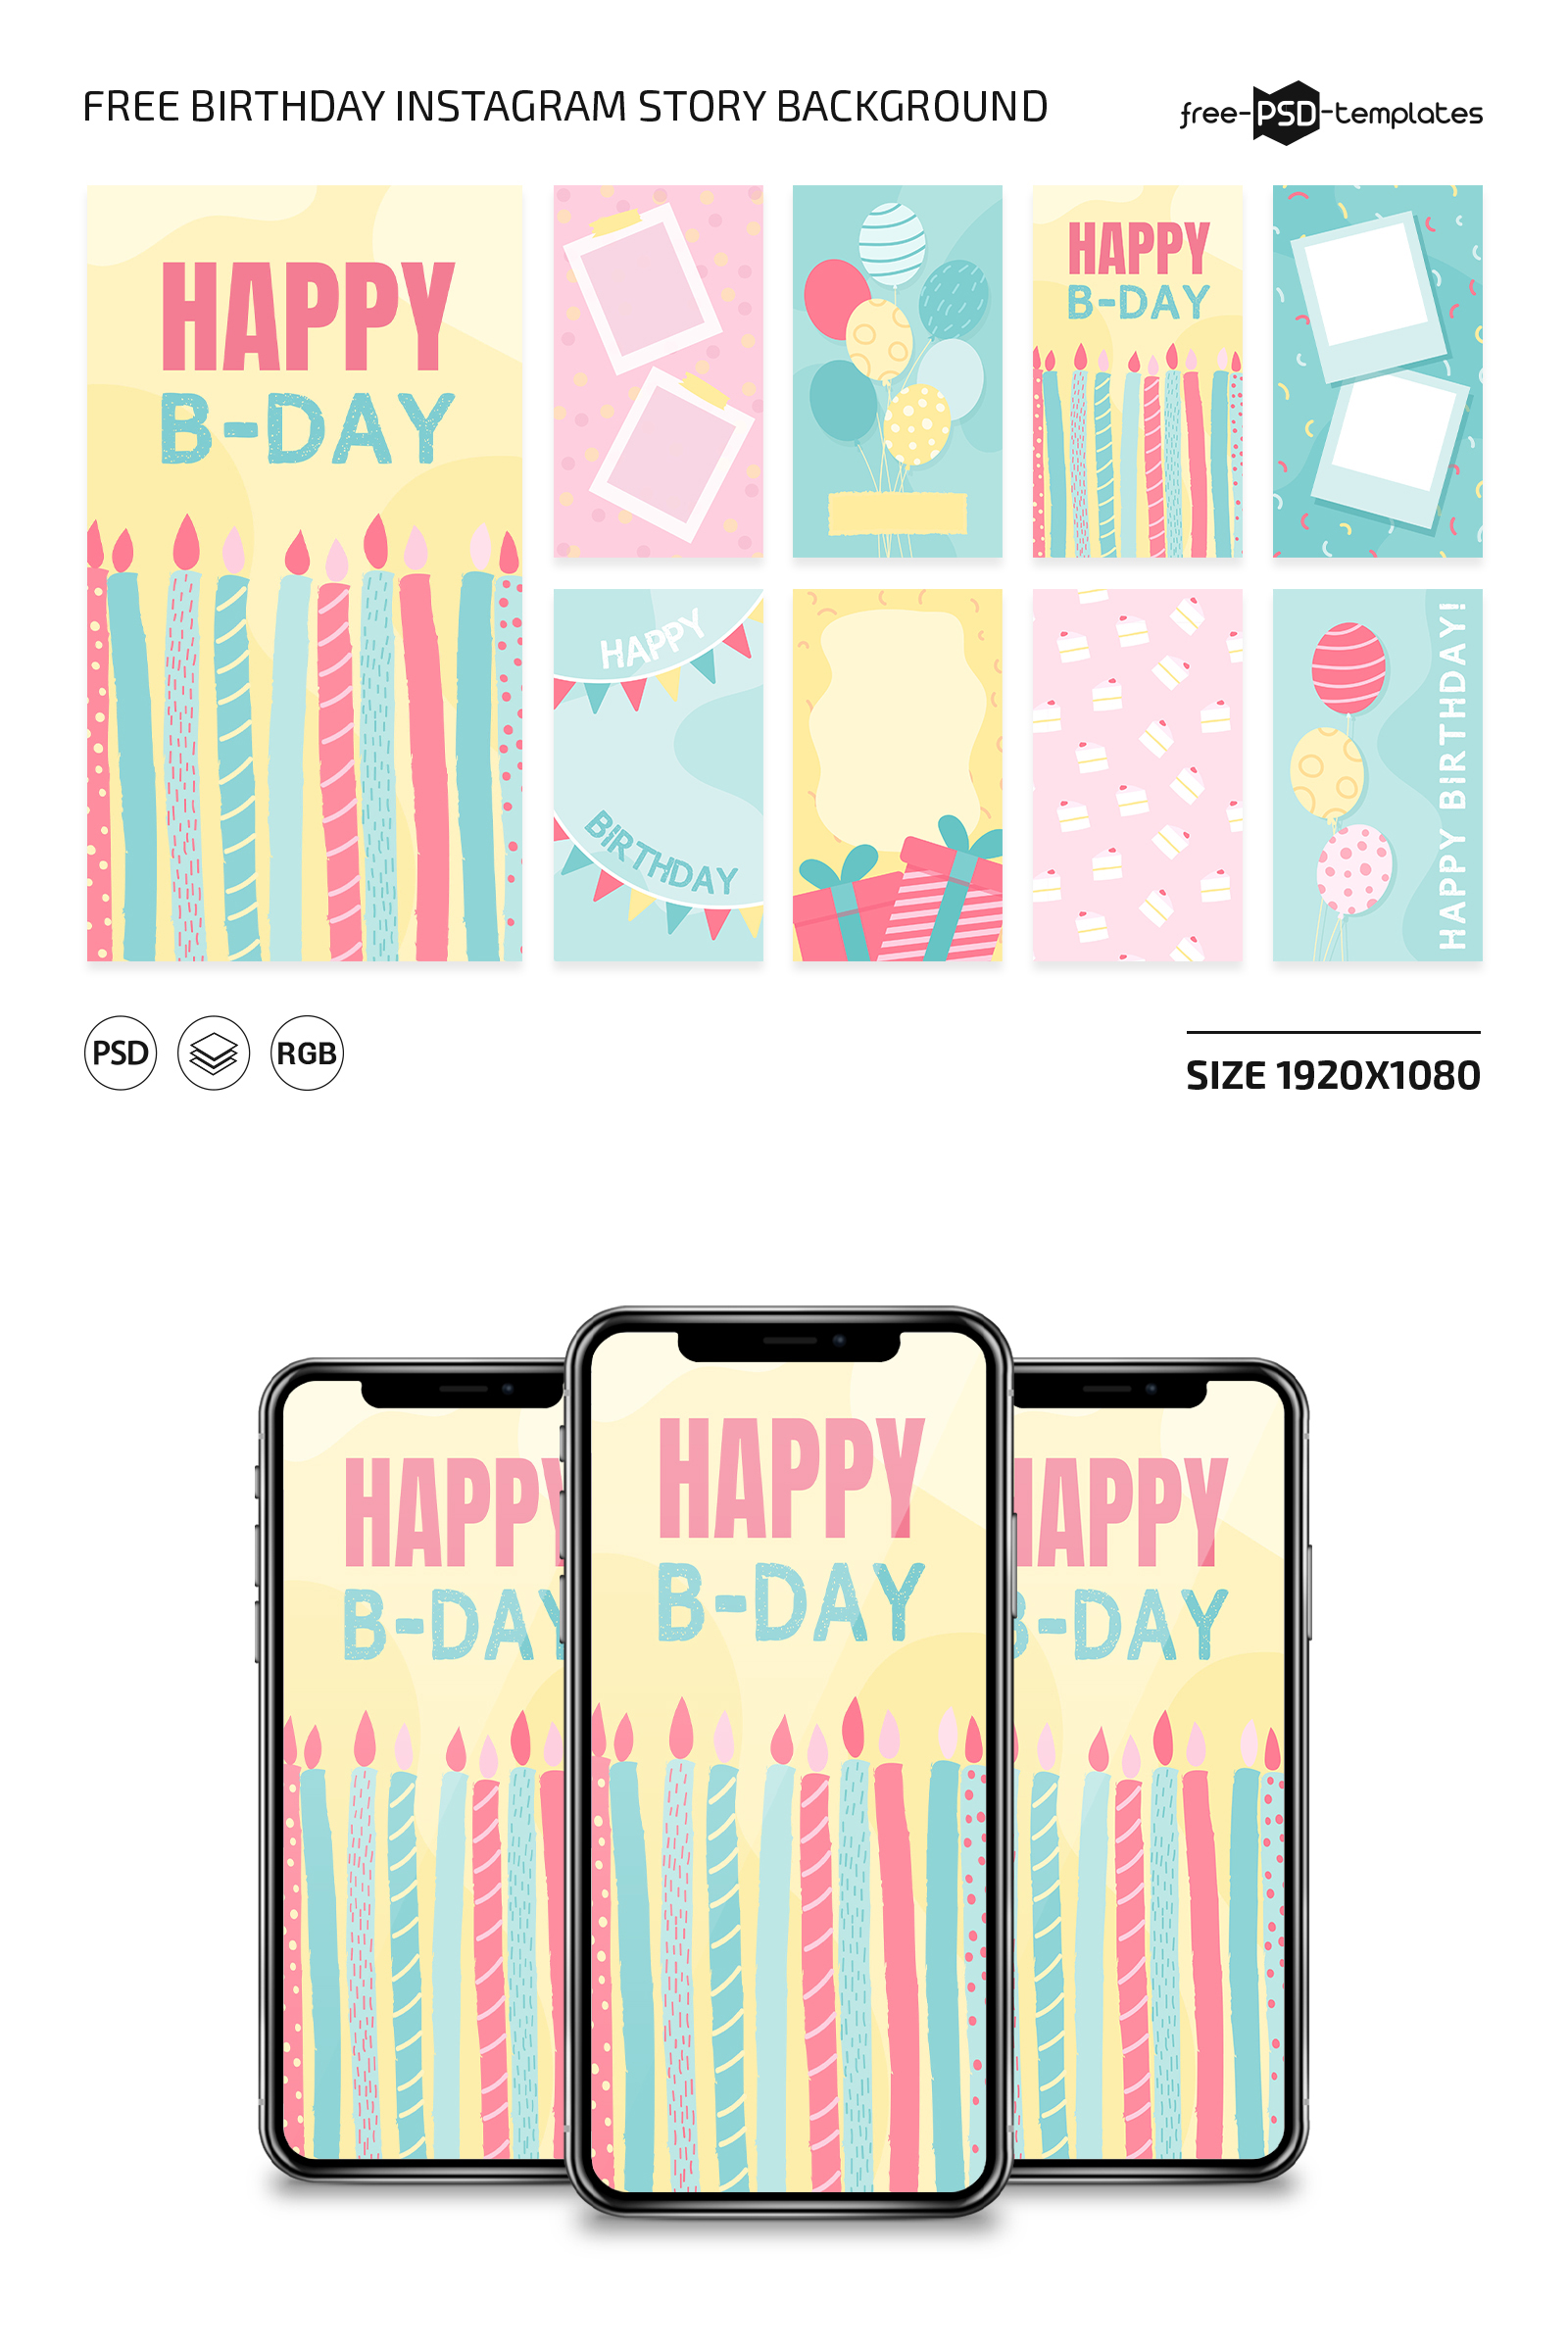 Free Birthday Instagram Story Background Template for Photoshop (PSD)